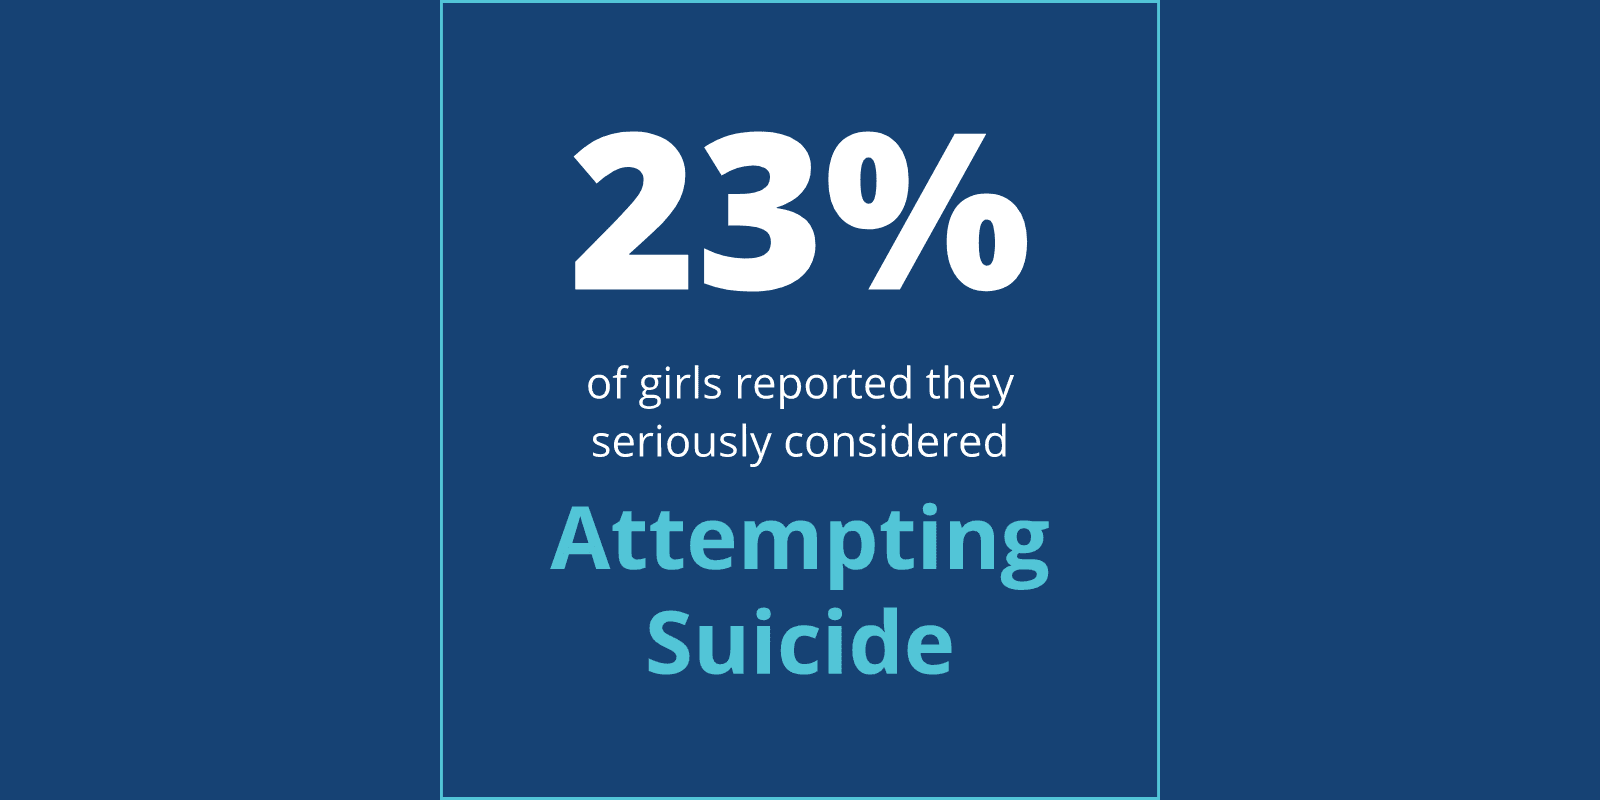 23% of girls reported they seriously considered attempting suicide